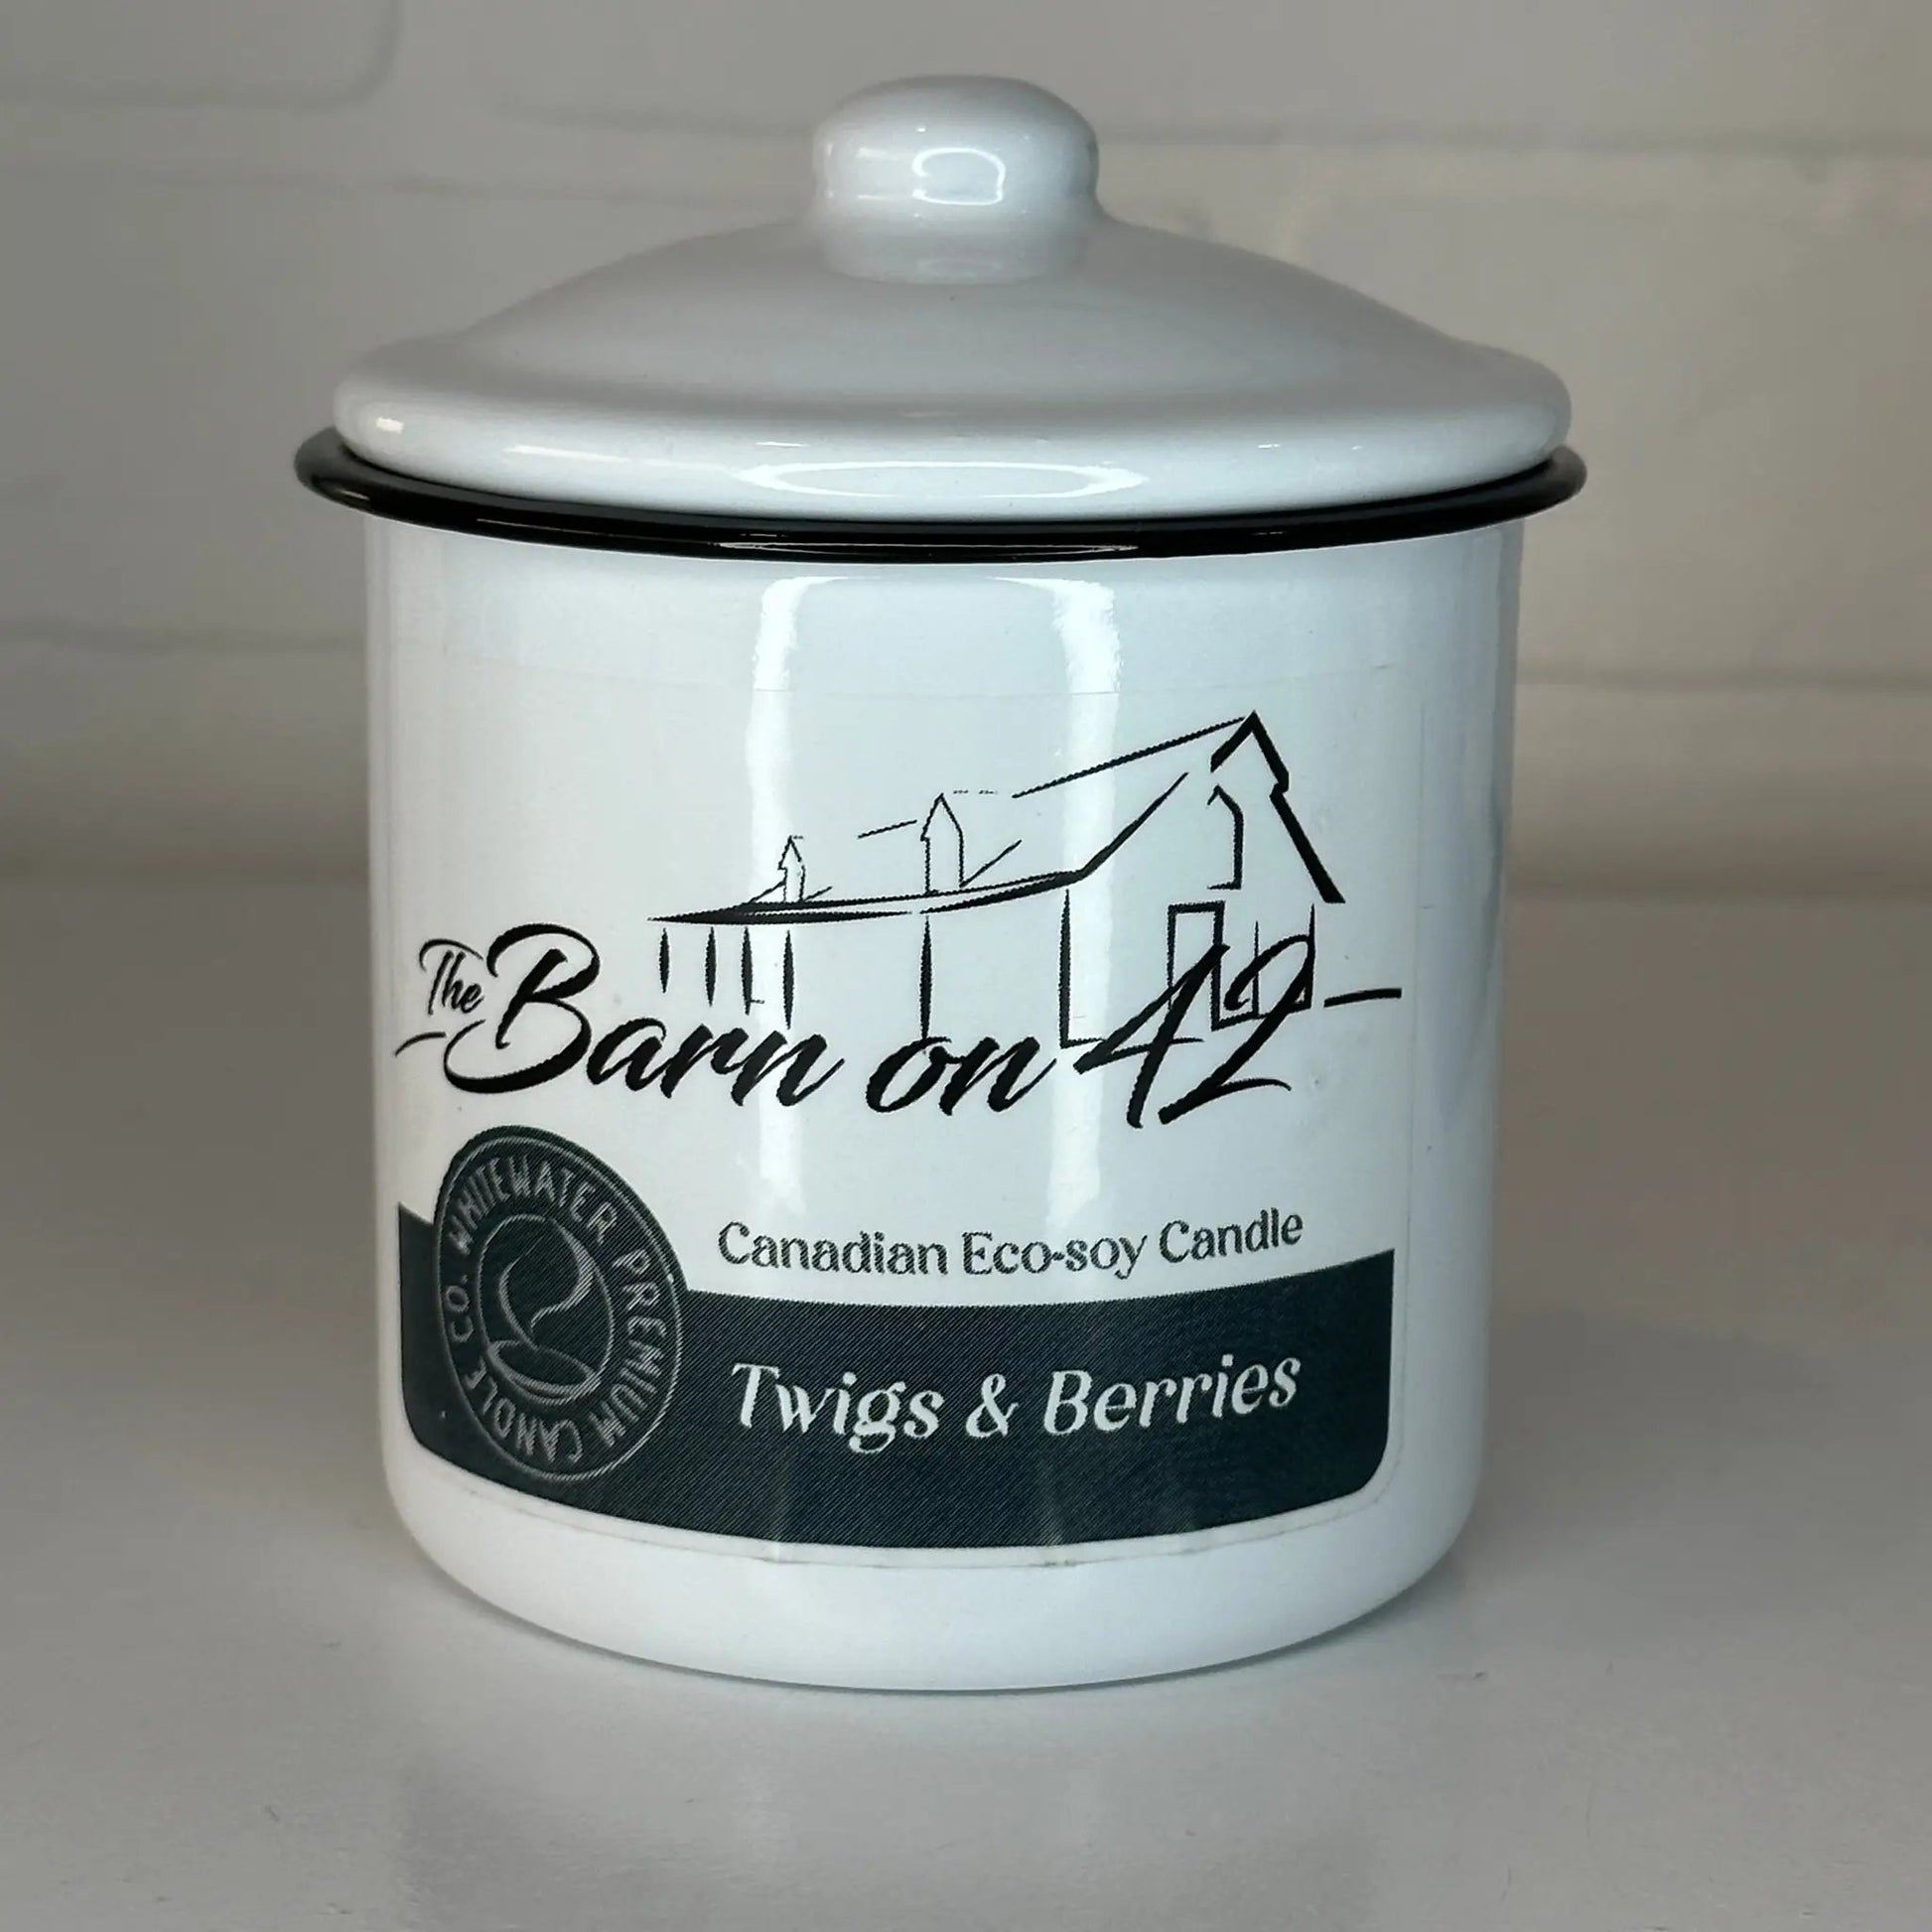 Twigs & Berries Eco-Soy Candle Whitewater Candles